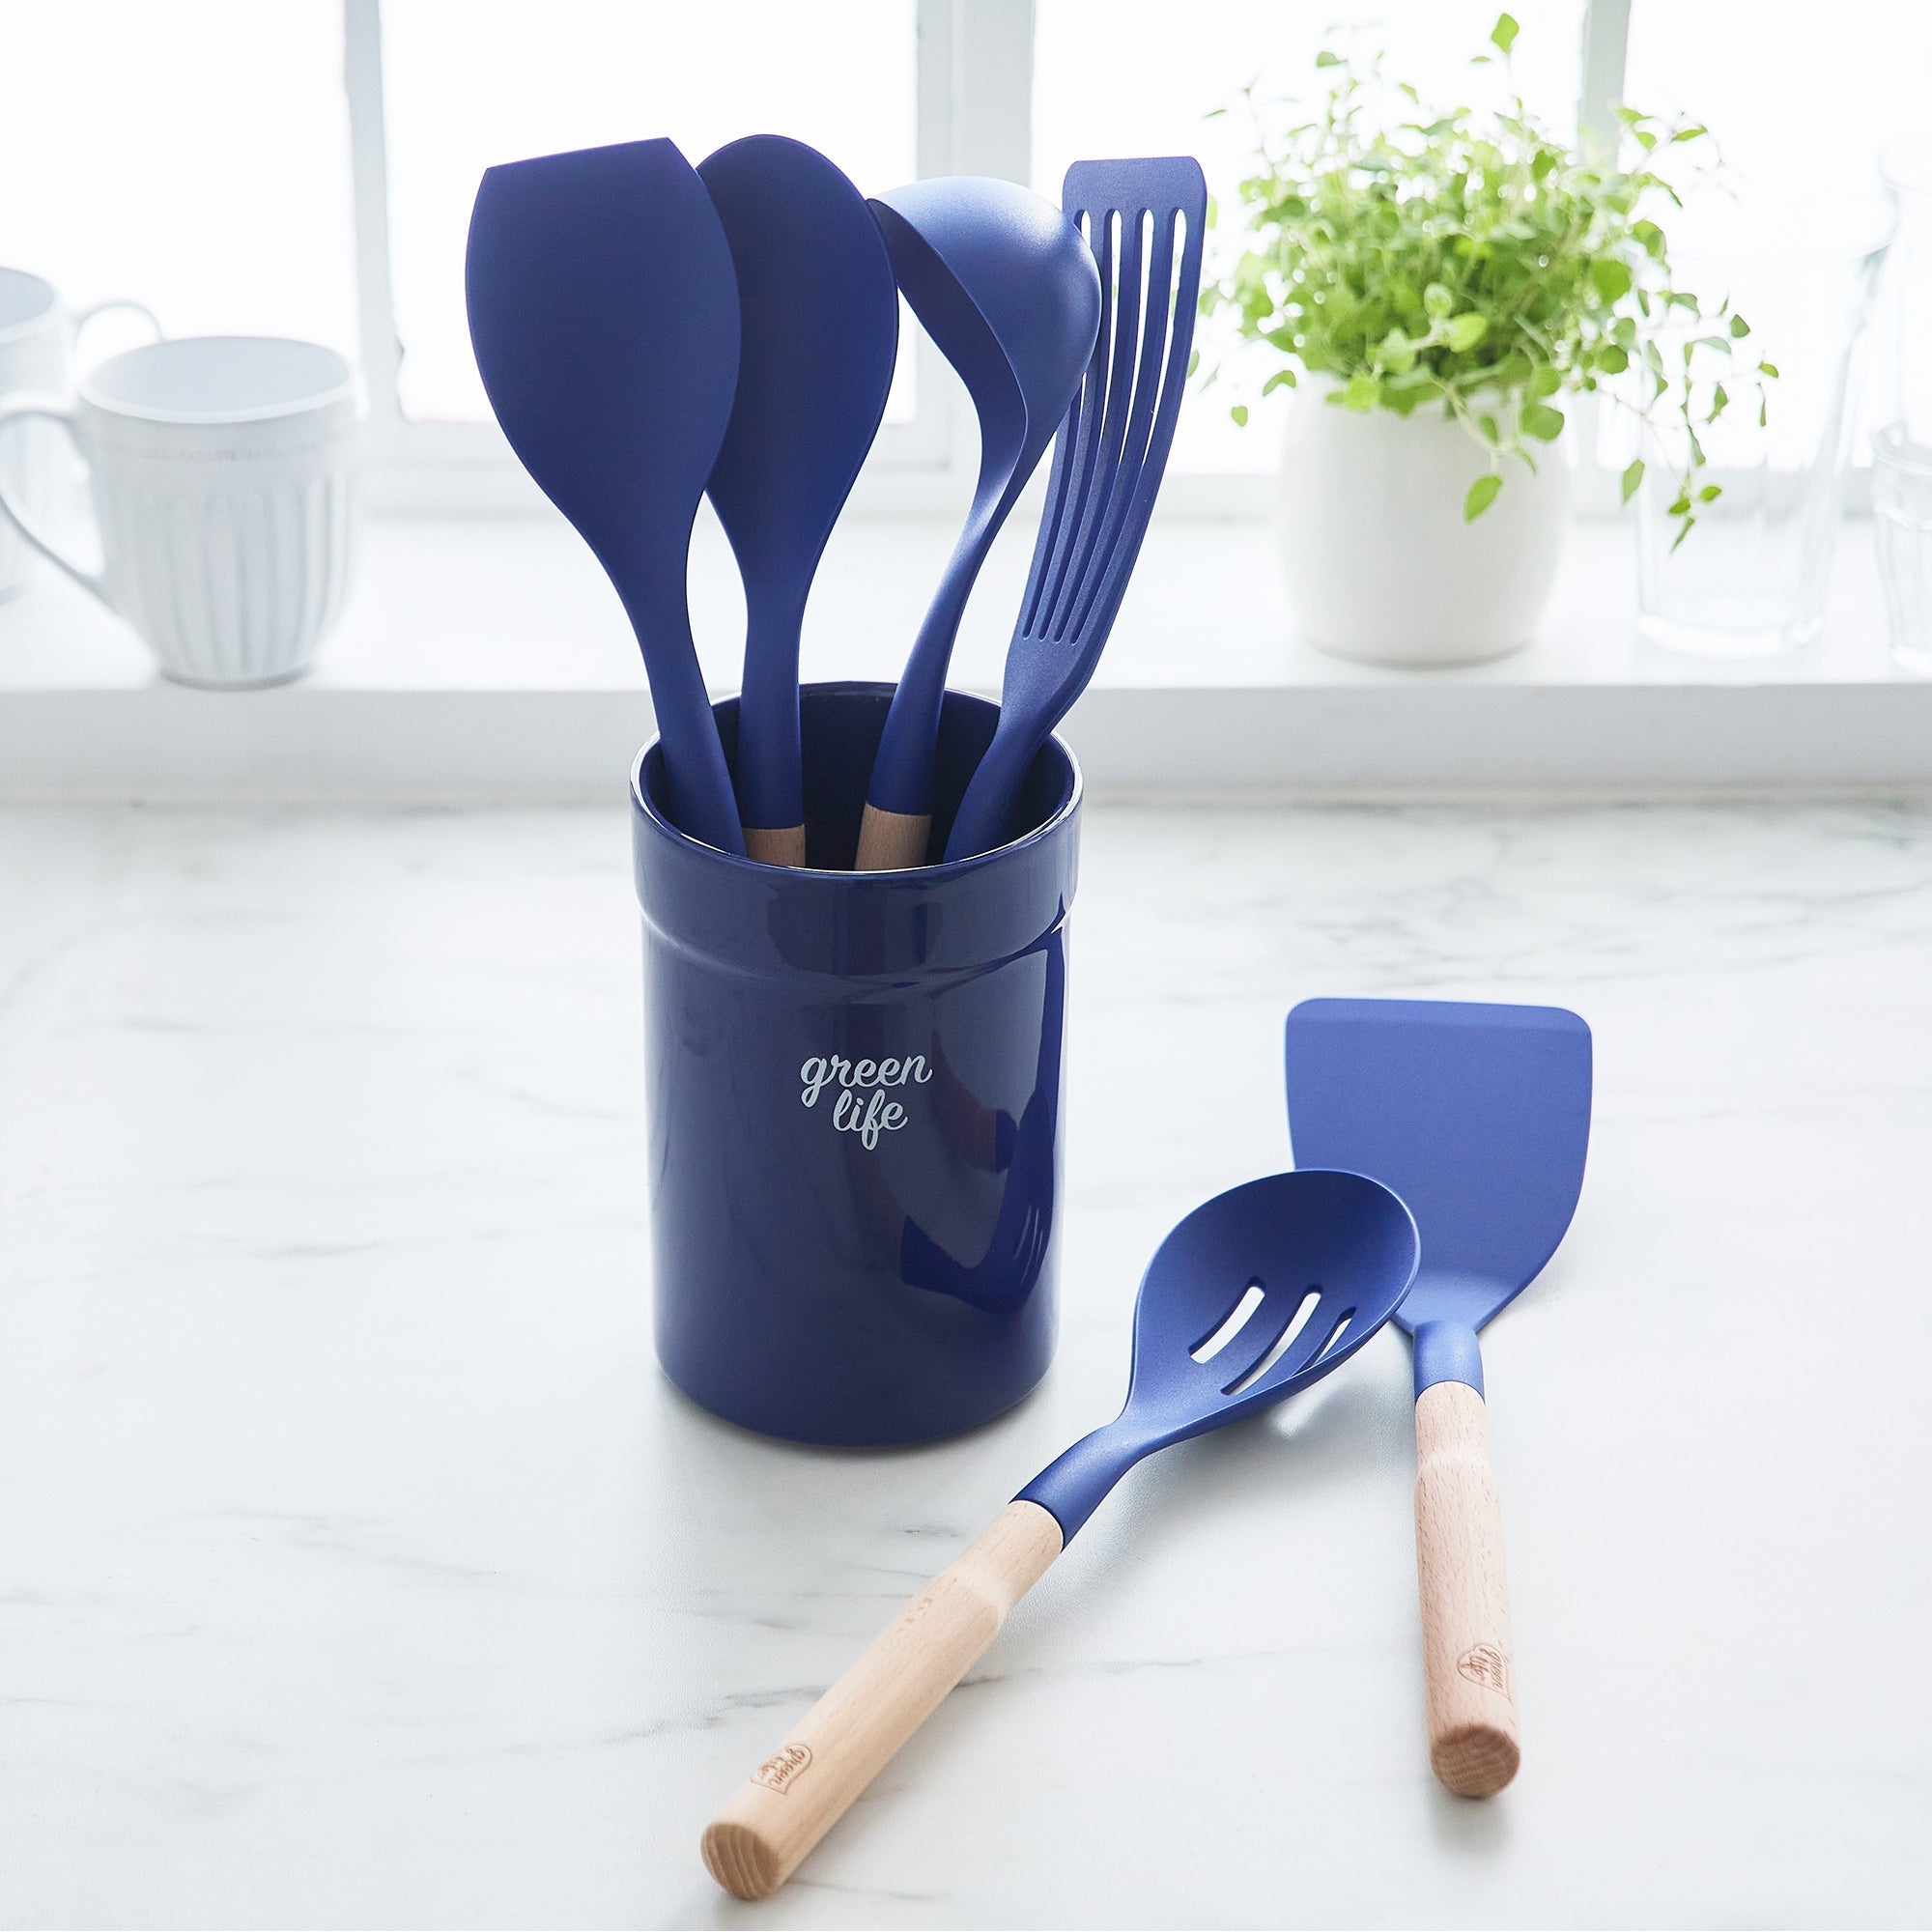 GreenLife Nylon & Wood Cooking Utensils with Ceramic Crock, 7-Piece Set | Blue